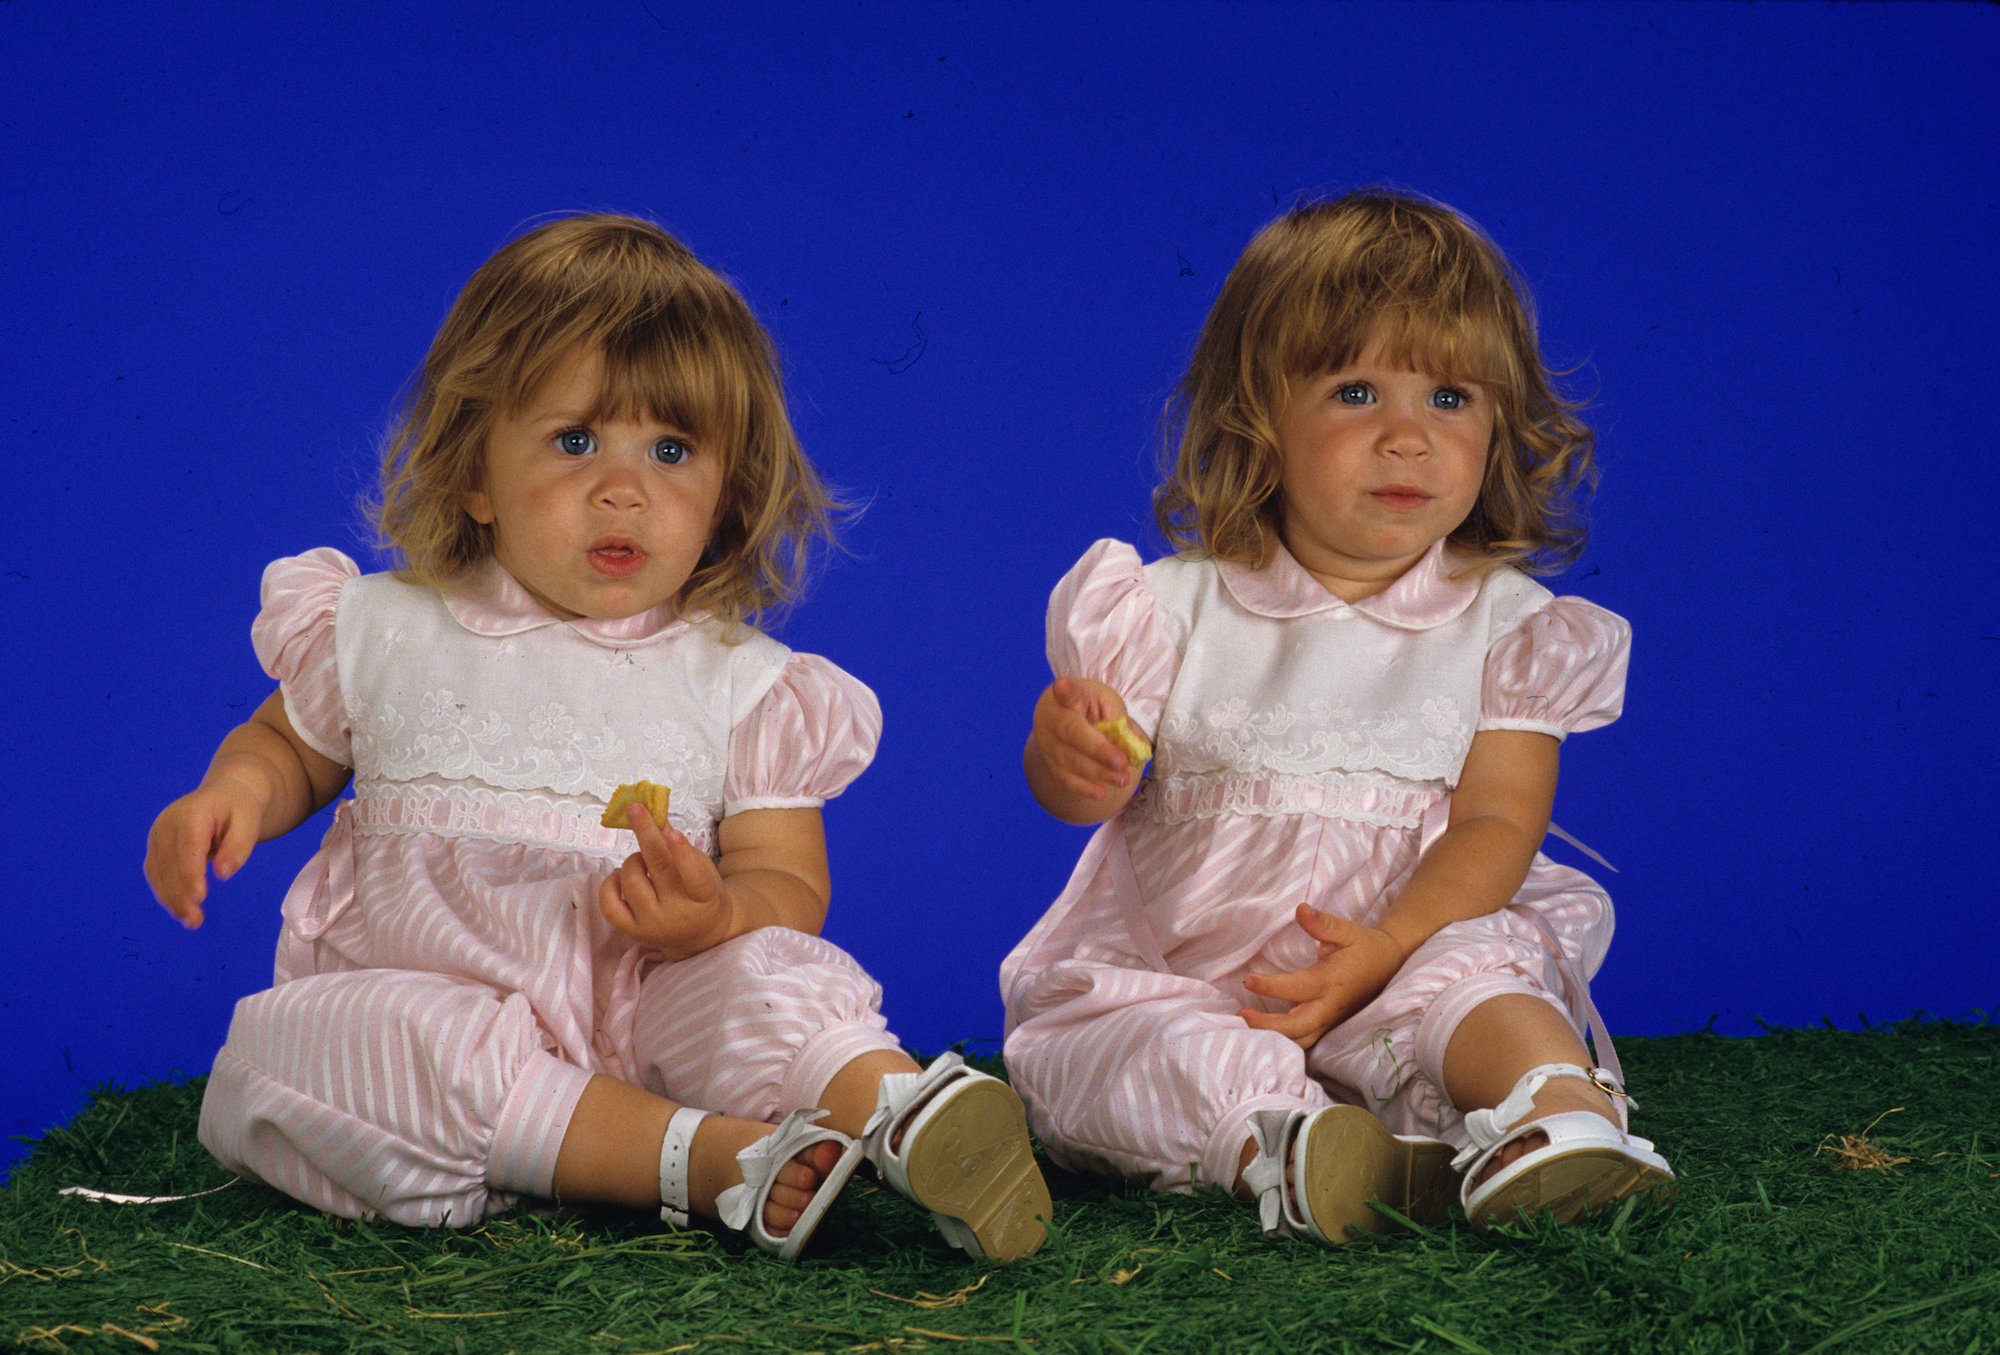 Ashley and Mary-Kate Olsen as babies, sitting in front of a blue background